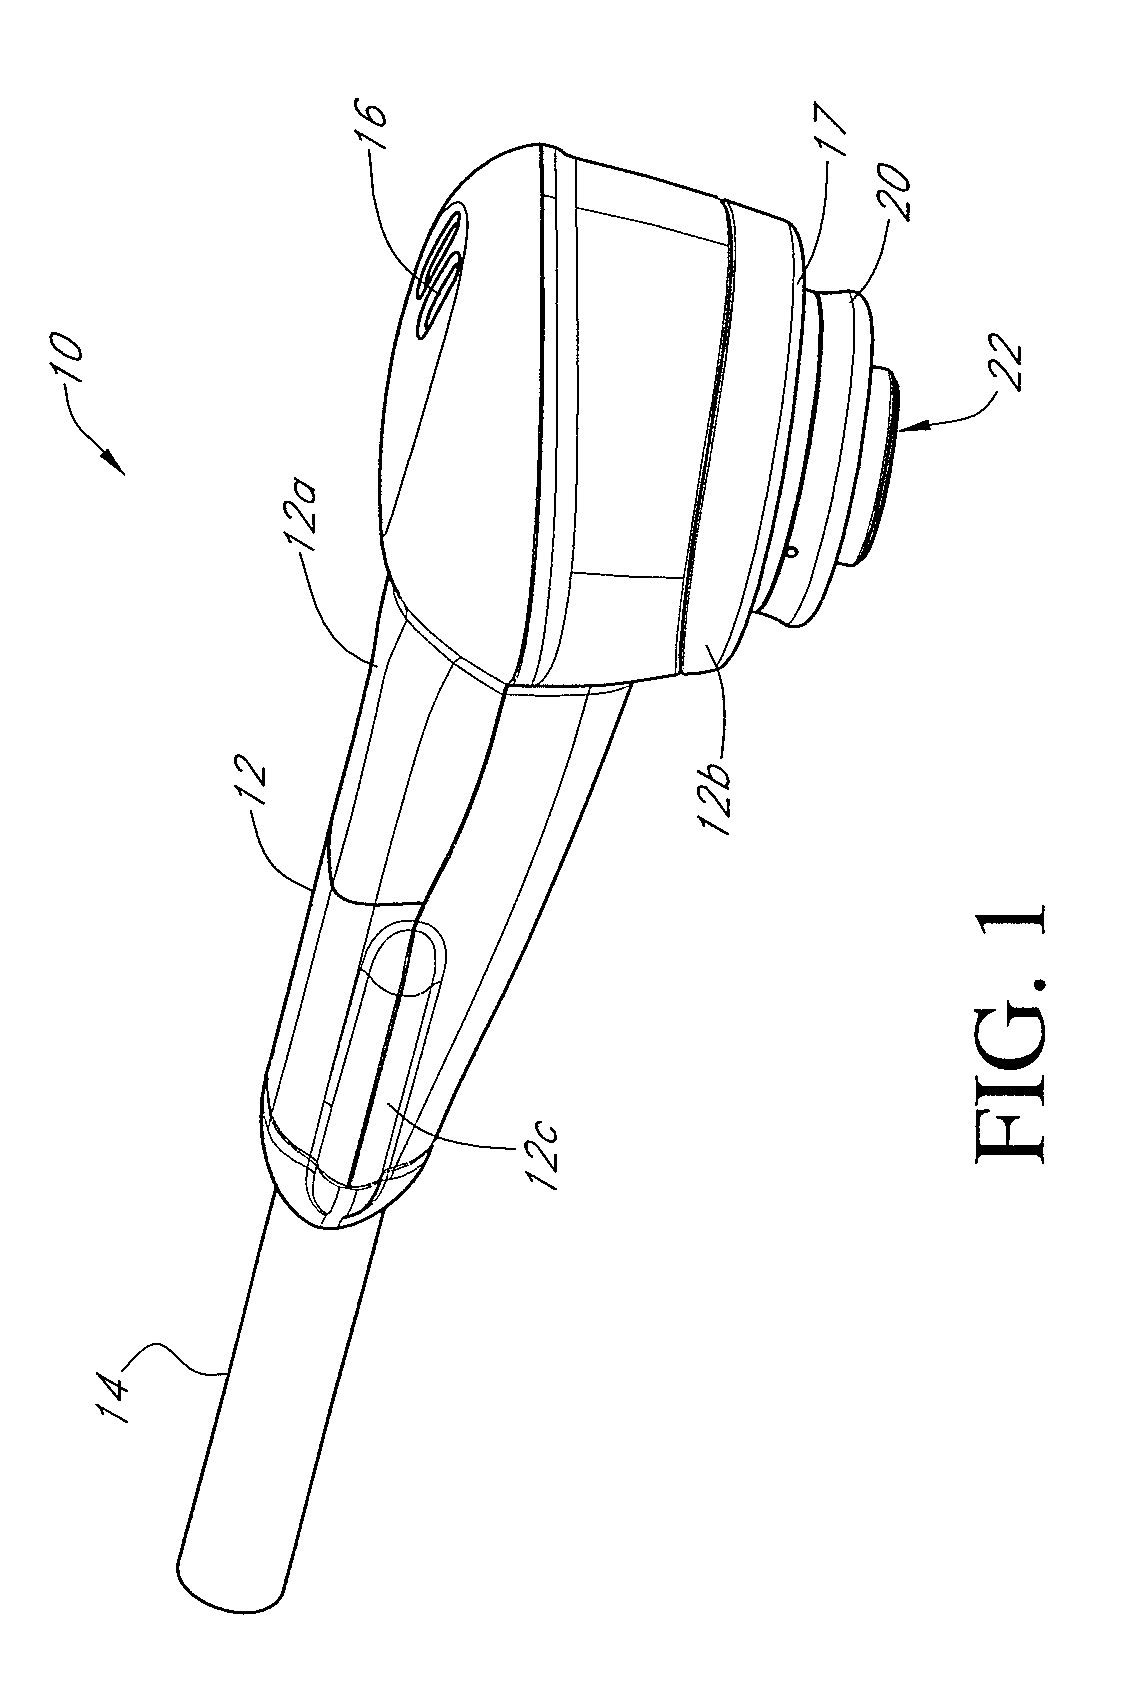 Apparatus and method for irradiating a surface with light